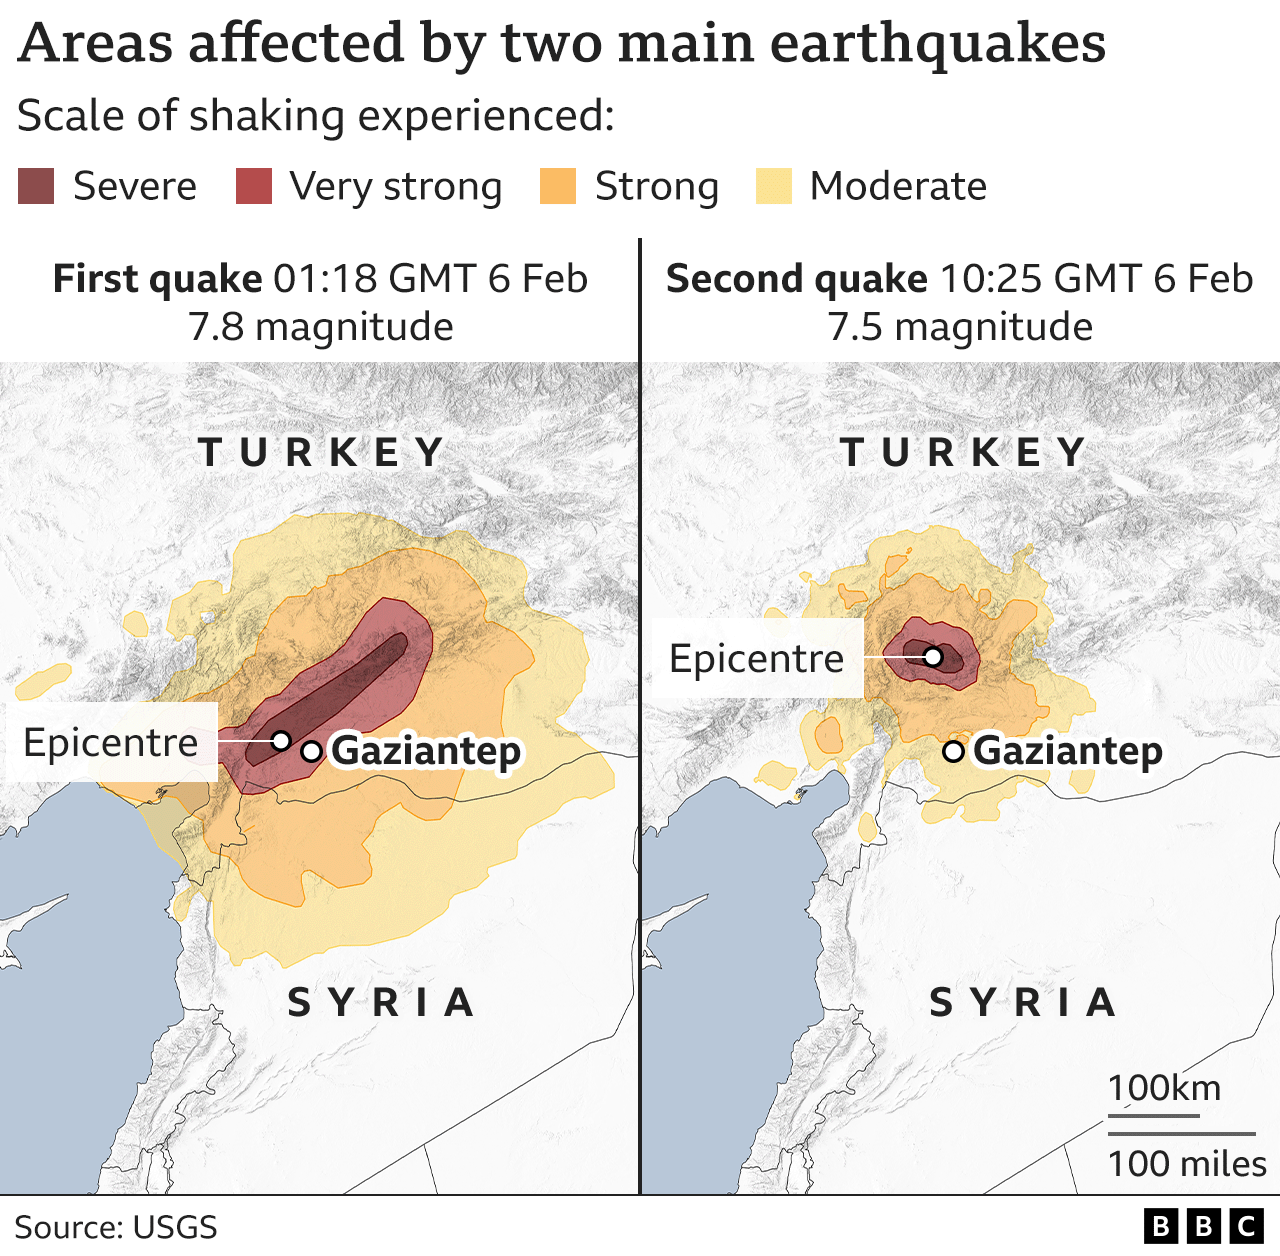 Two maps showing the epicentres of the first and second earthquakes in Turkey and the area and scale of shaking that each caused